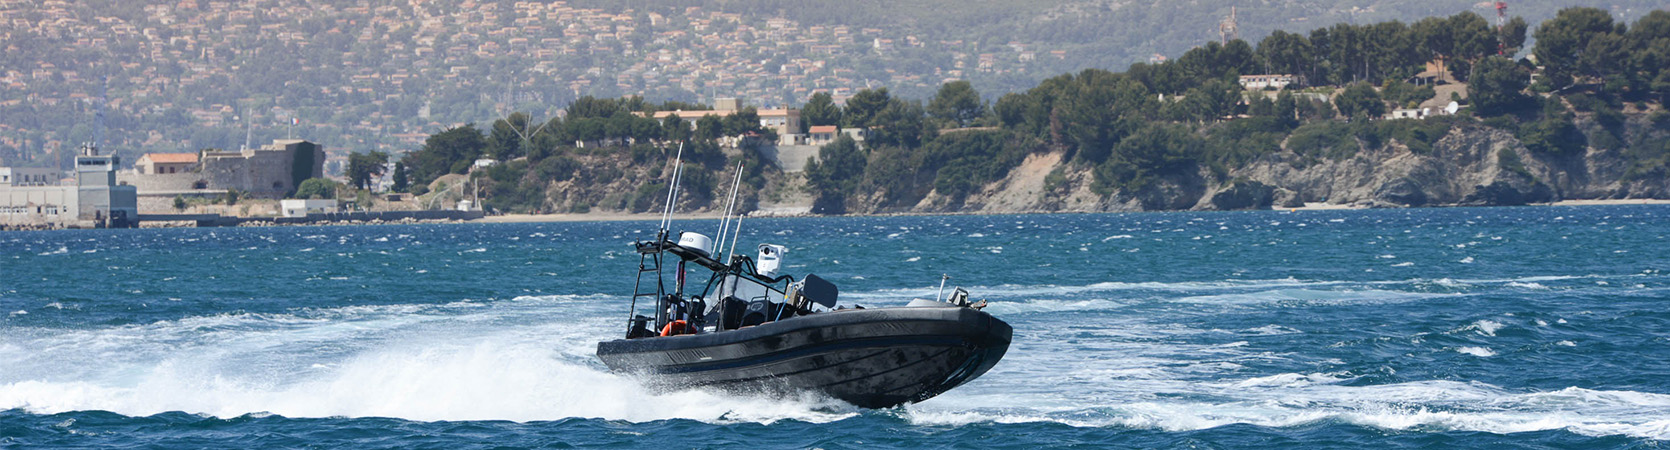 DVIDS - News - On the Surface: ONR SCOUT Showcases Unmanned Surface Vehicle  Capability on the Water